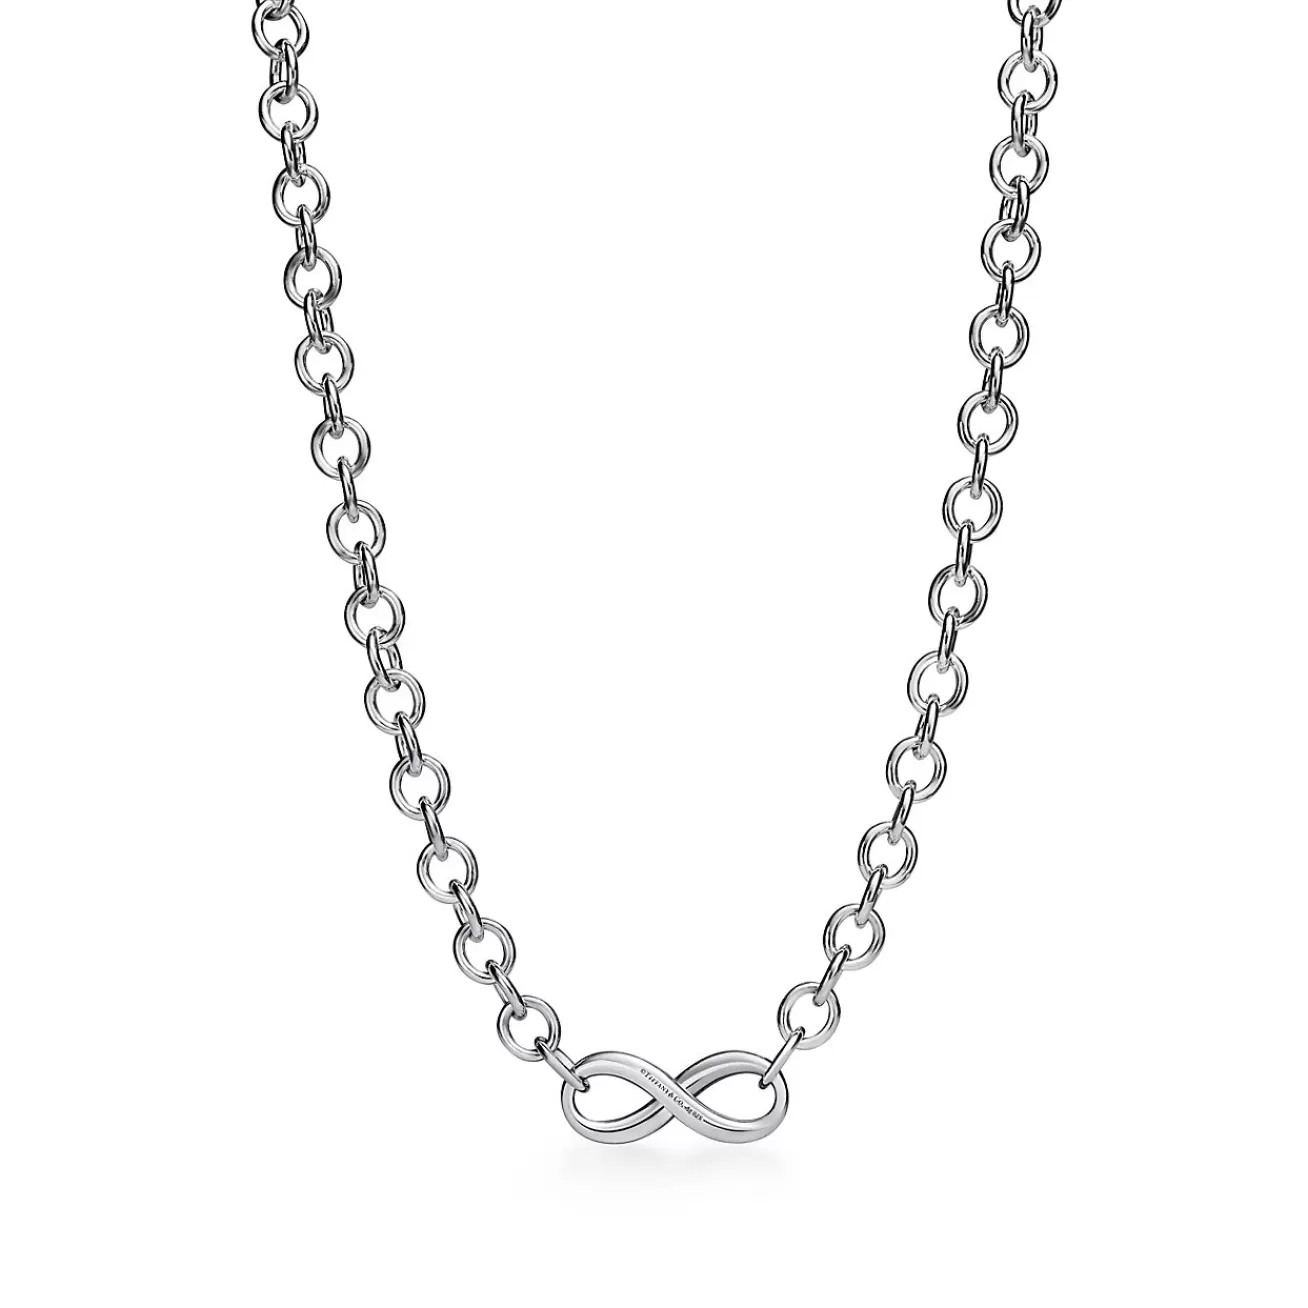 Tiffany & Co. Tiffany Infinity Necklace in Sterling Silver | ^ Necklaces & Pendants | Bold Silver Jewelry